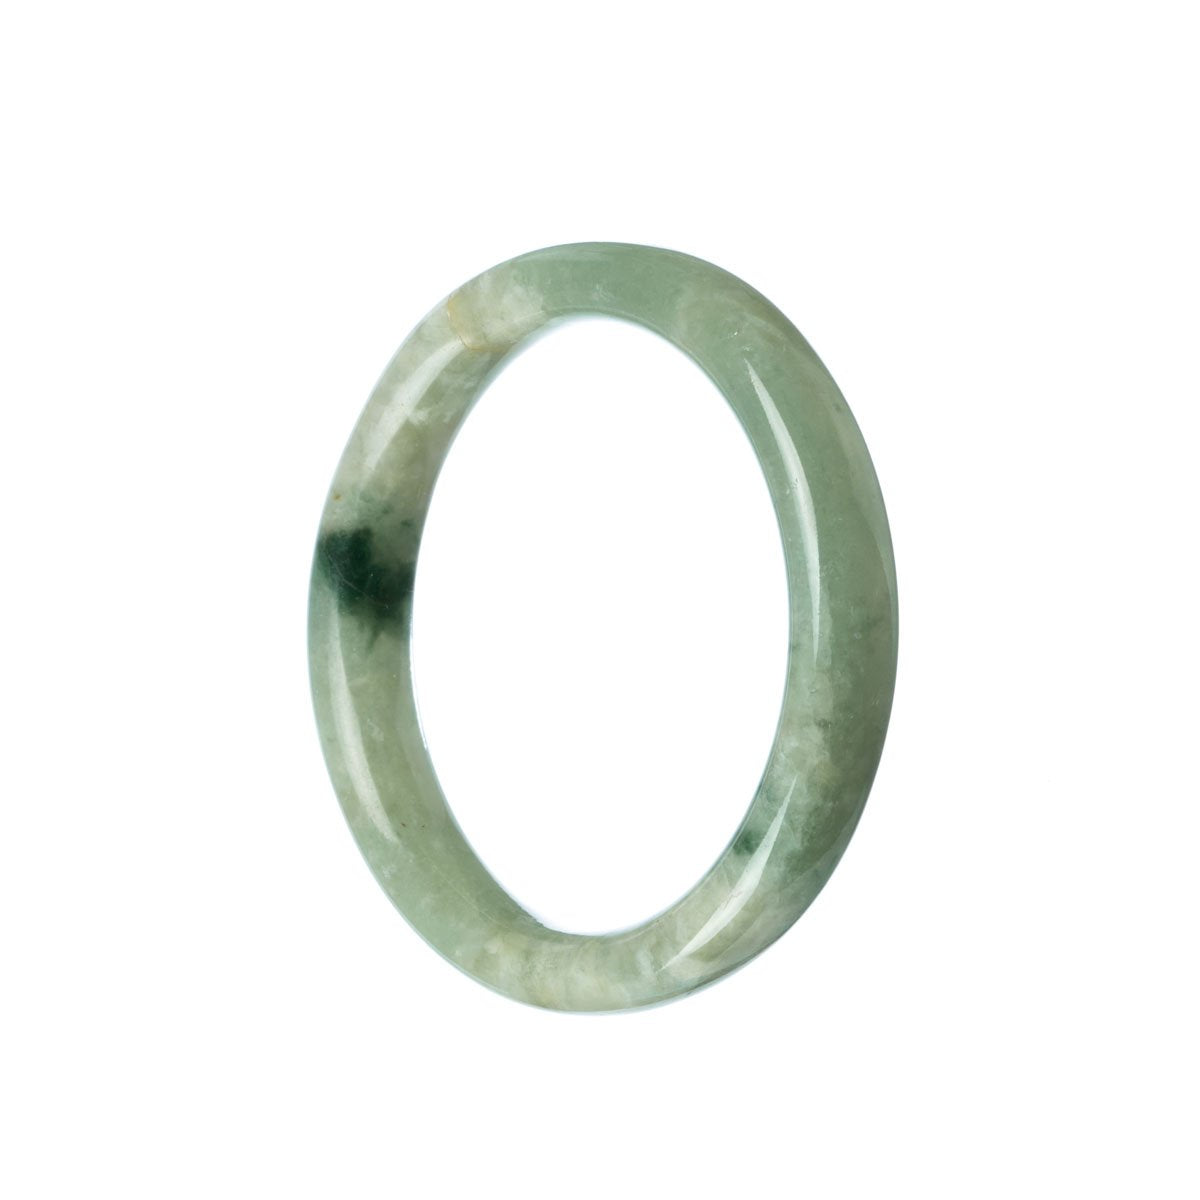 A close-up of a beautiful green jade bangle bracelet with a semi-round shape, measuring 54mm in size. The bracelet is made of genuine Type A Green Burma Jade and is designed by MAYS™.